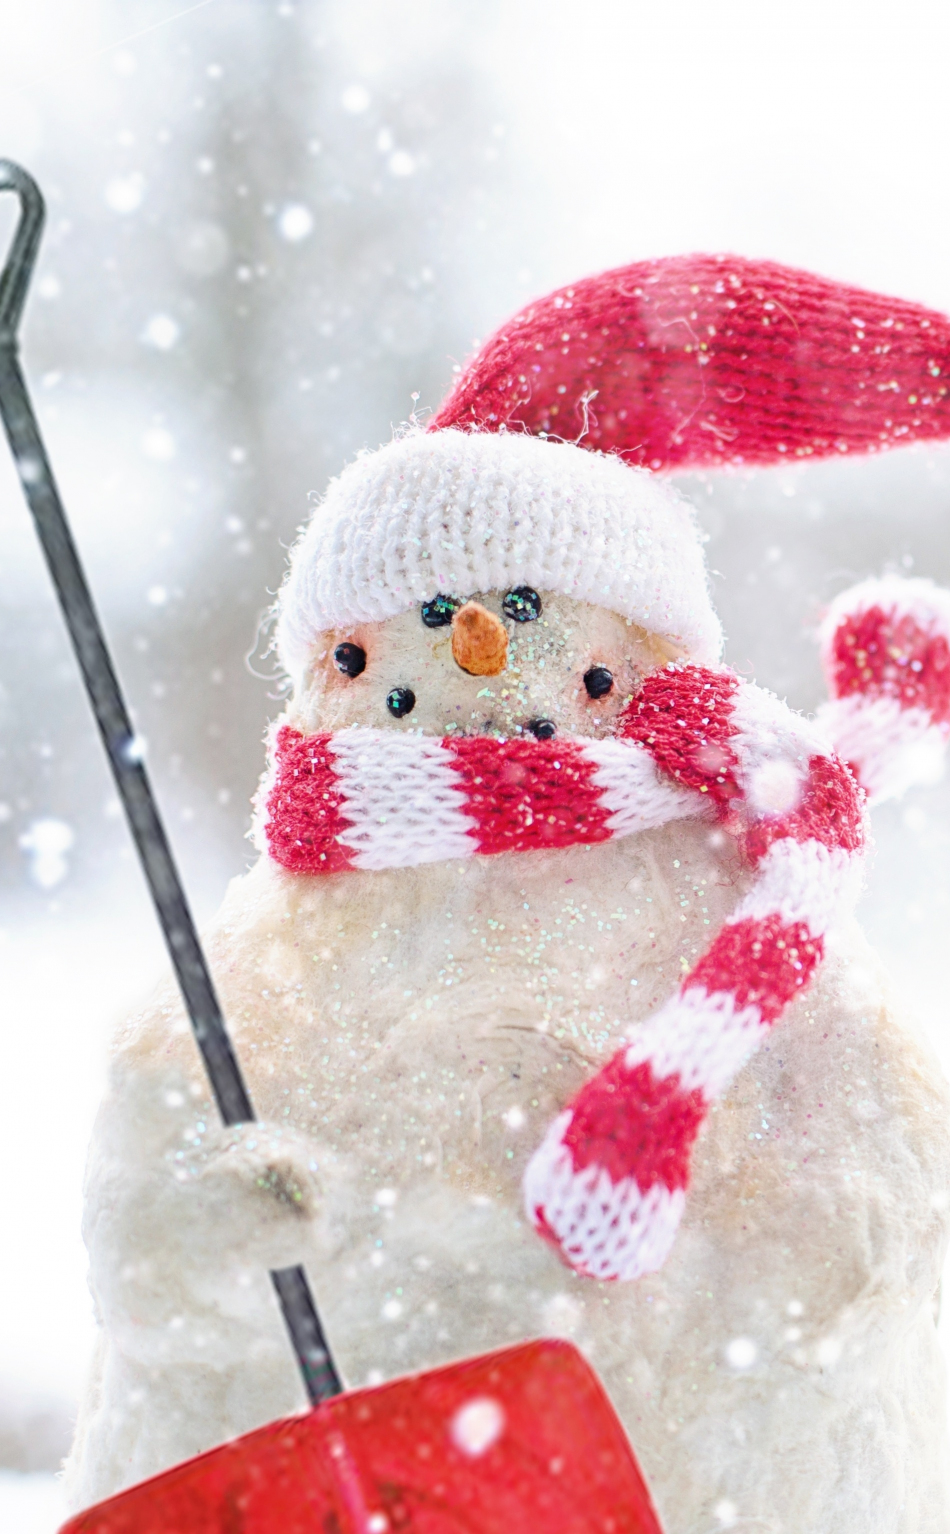 Download wallpaper 950x1534 winter, snowman, holiday, iphone, 950x1534 ...